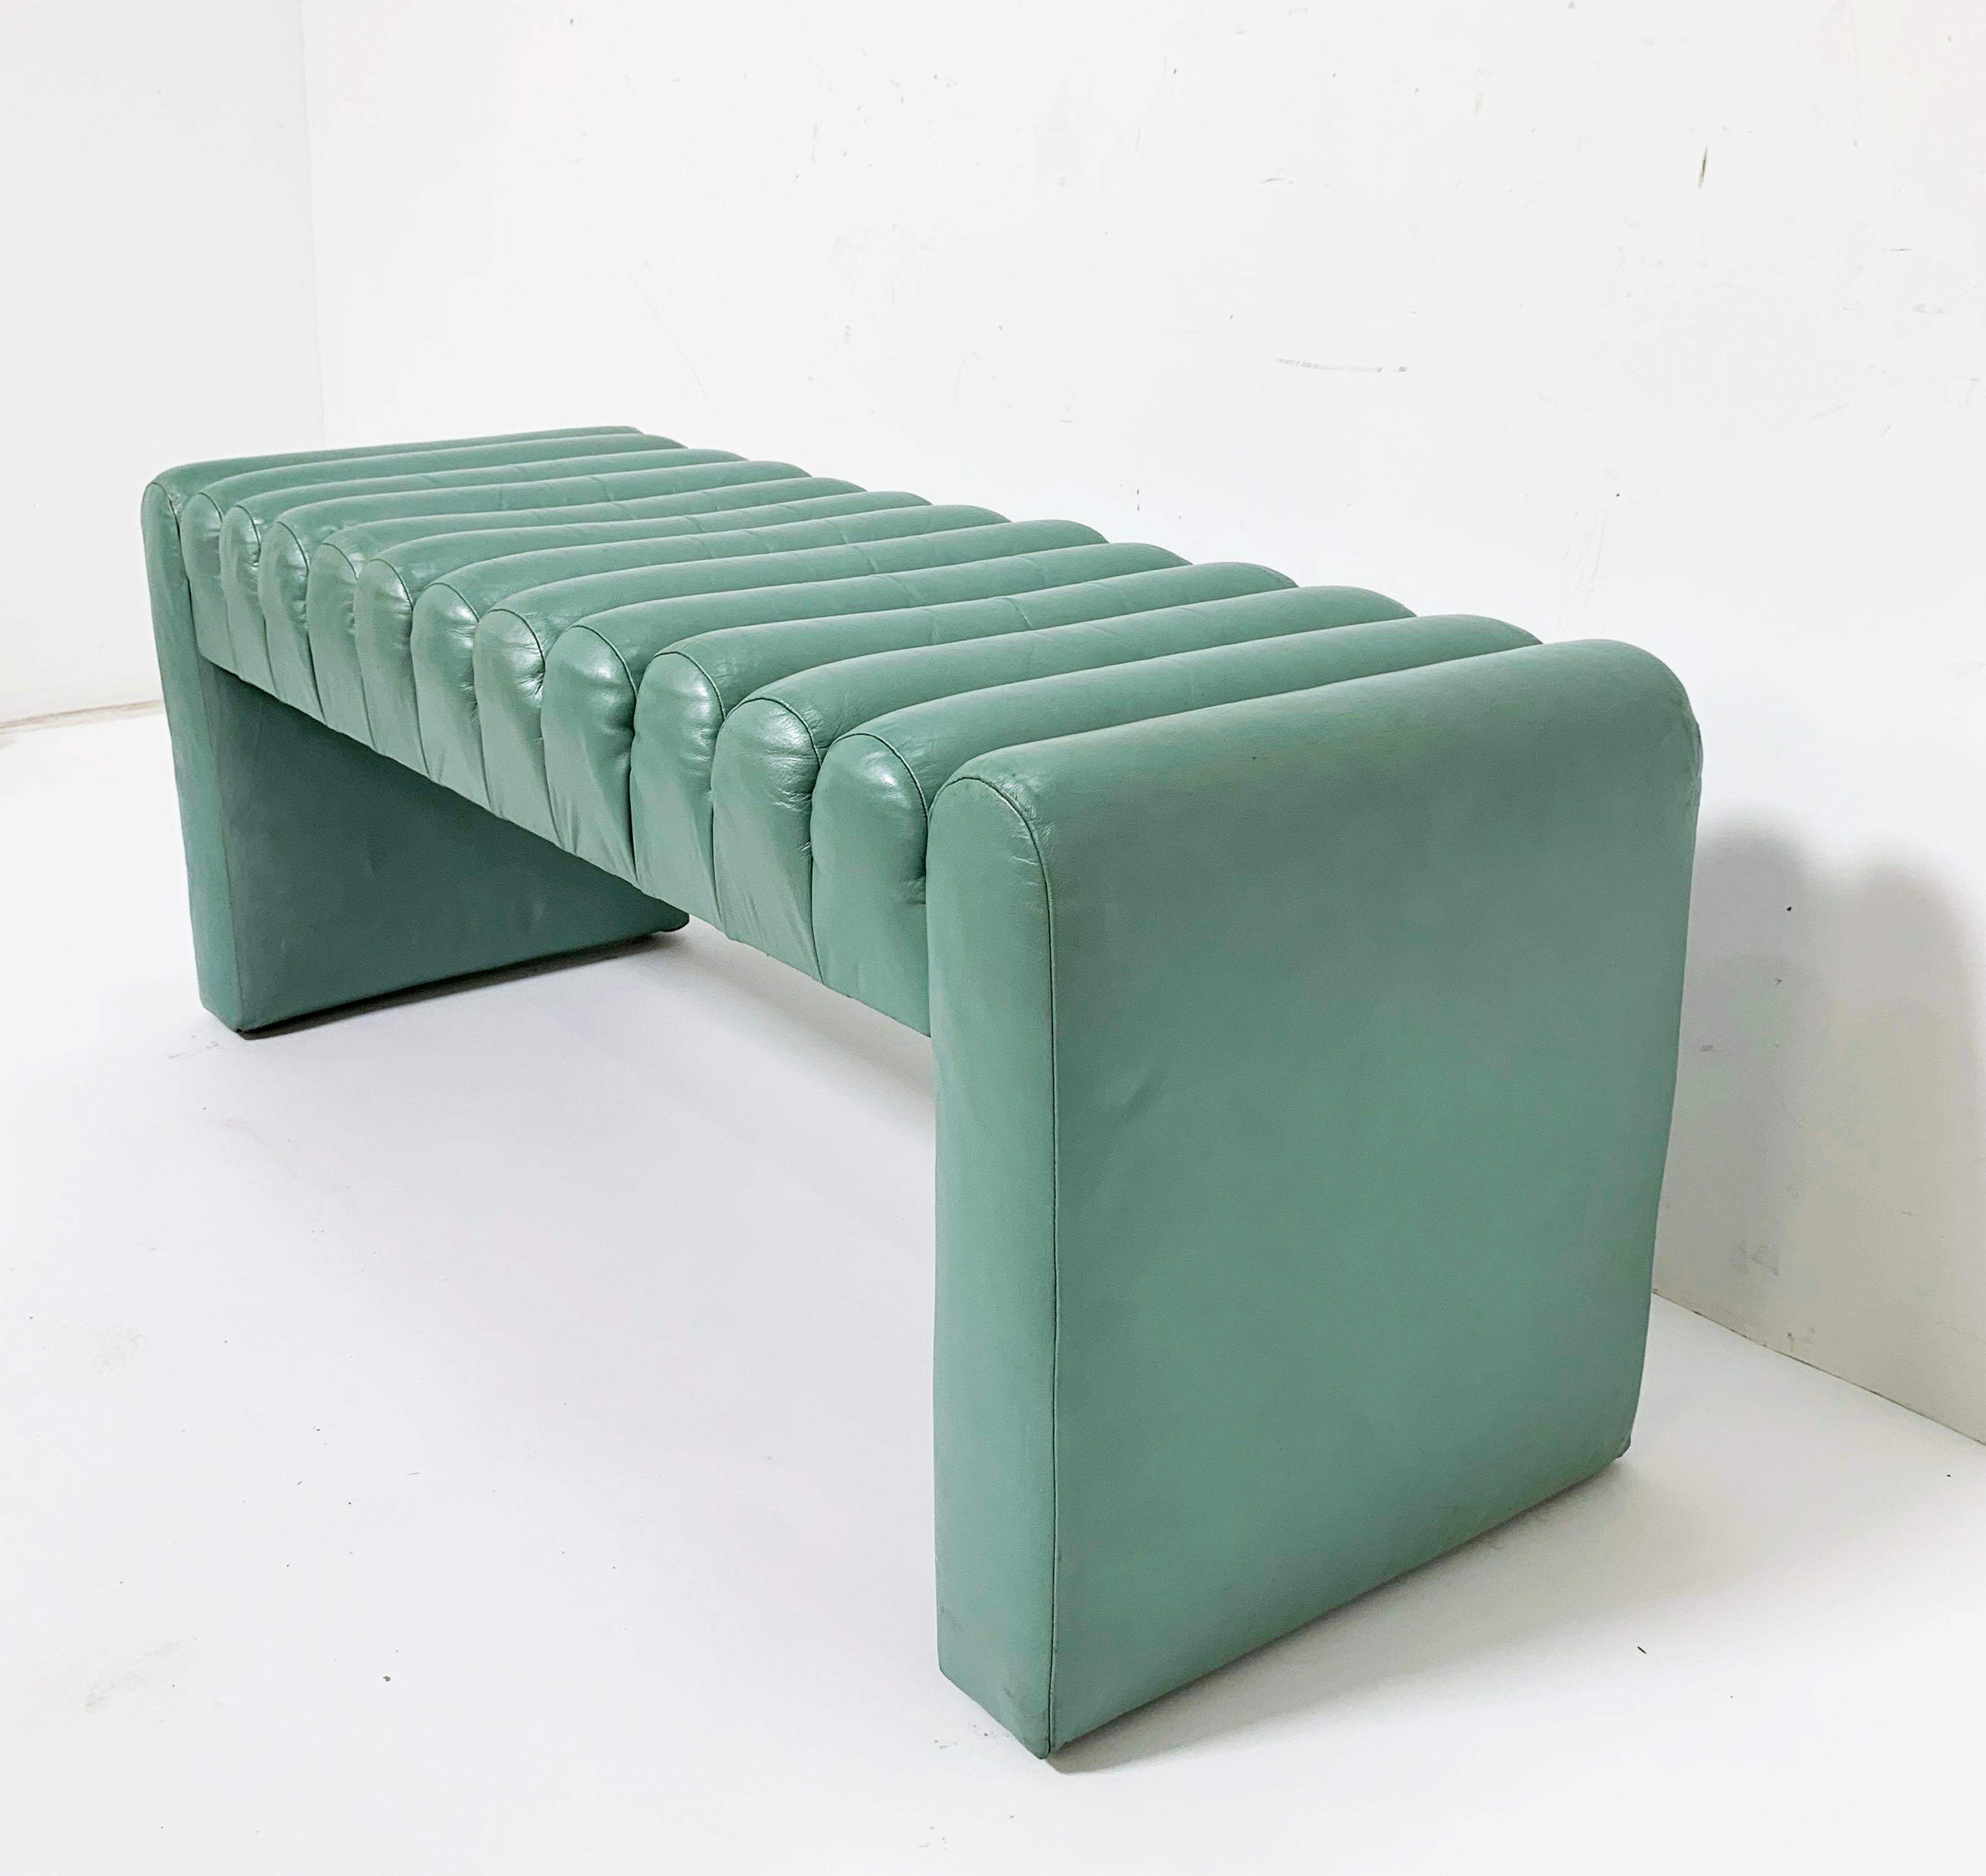 An unusual Postmodern channel form bench in aqua leather with a slight pearlescent sheen, circa 1980s.